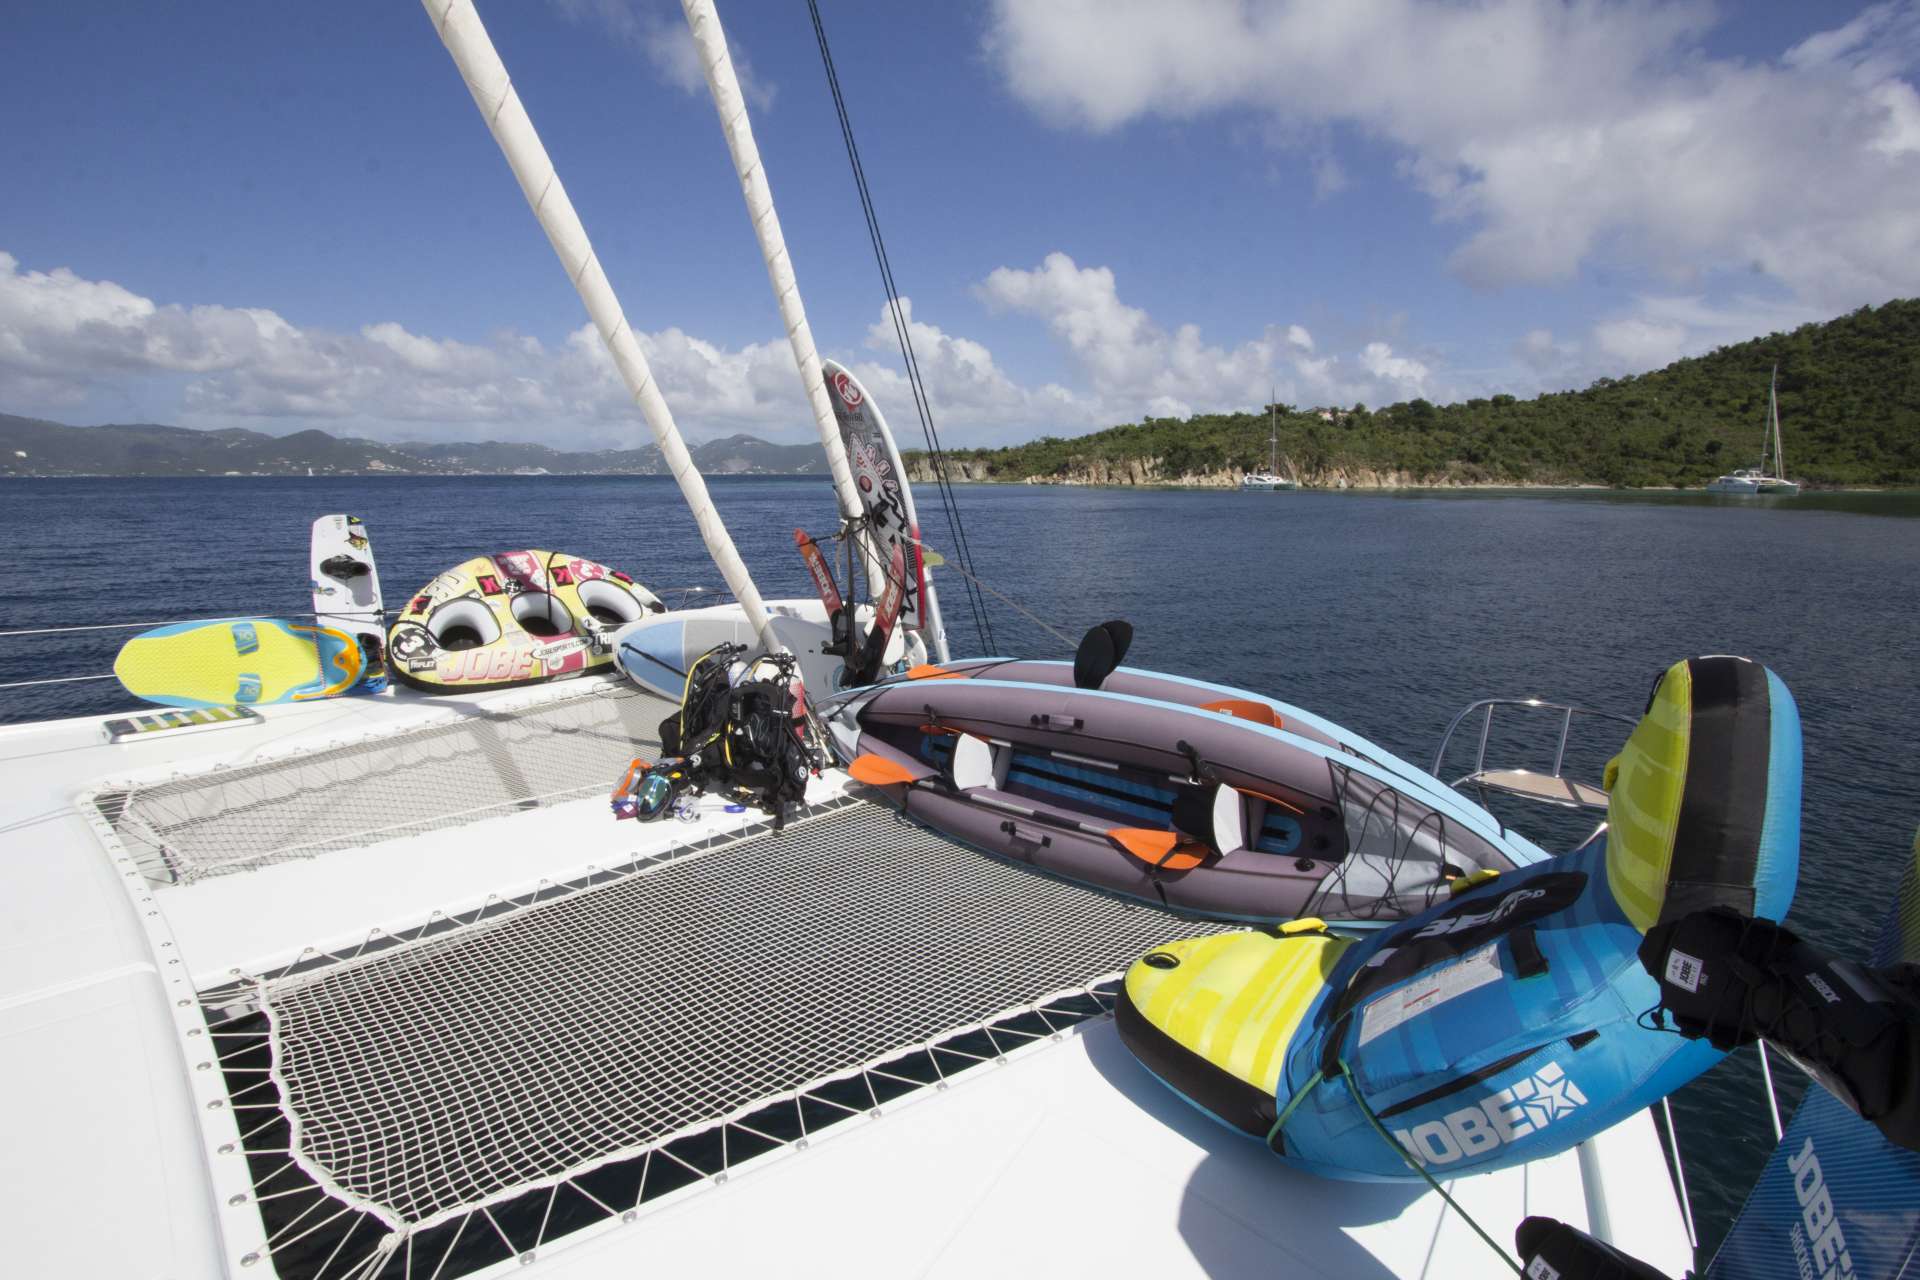 NENNE Yacht Charter - Trampolines and Lots of Water Toys